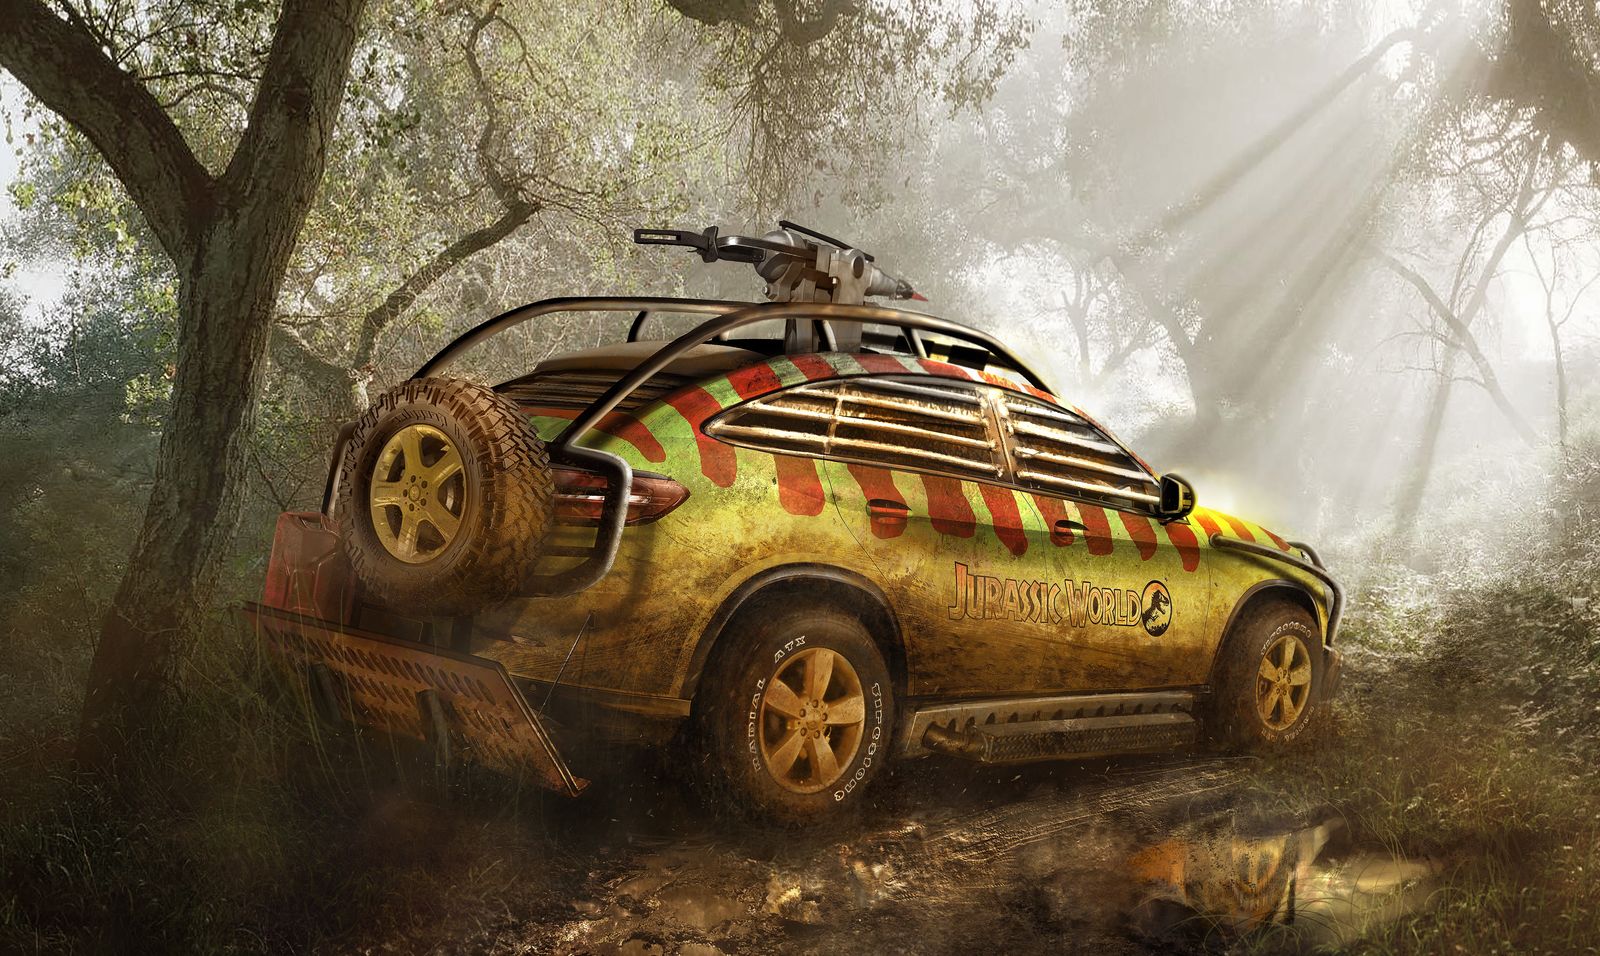 Mercedes GLE Coupe Rendered as Rugged Dinosaur Survival Machine [Cool